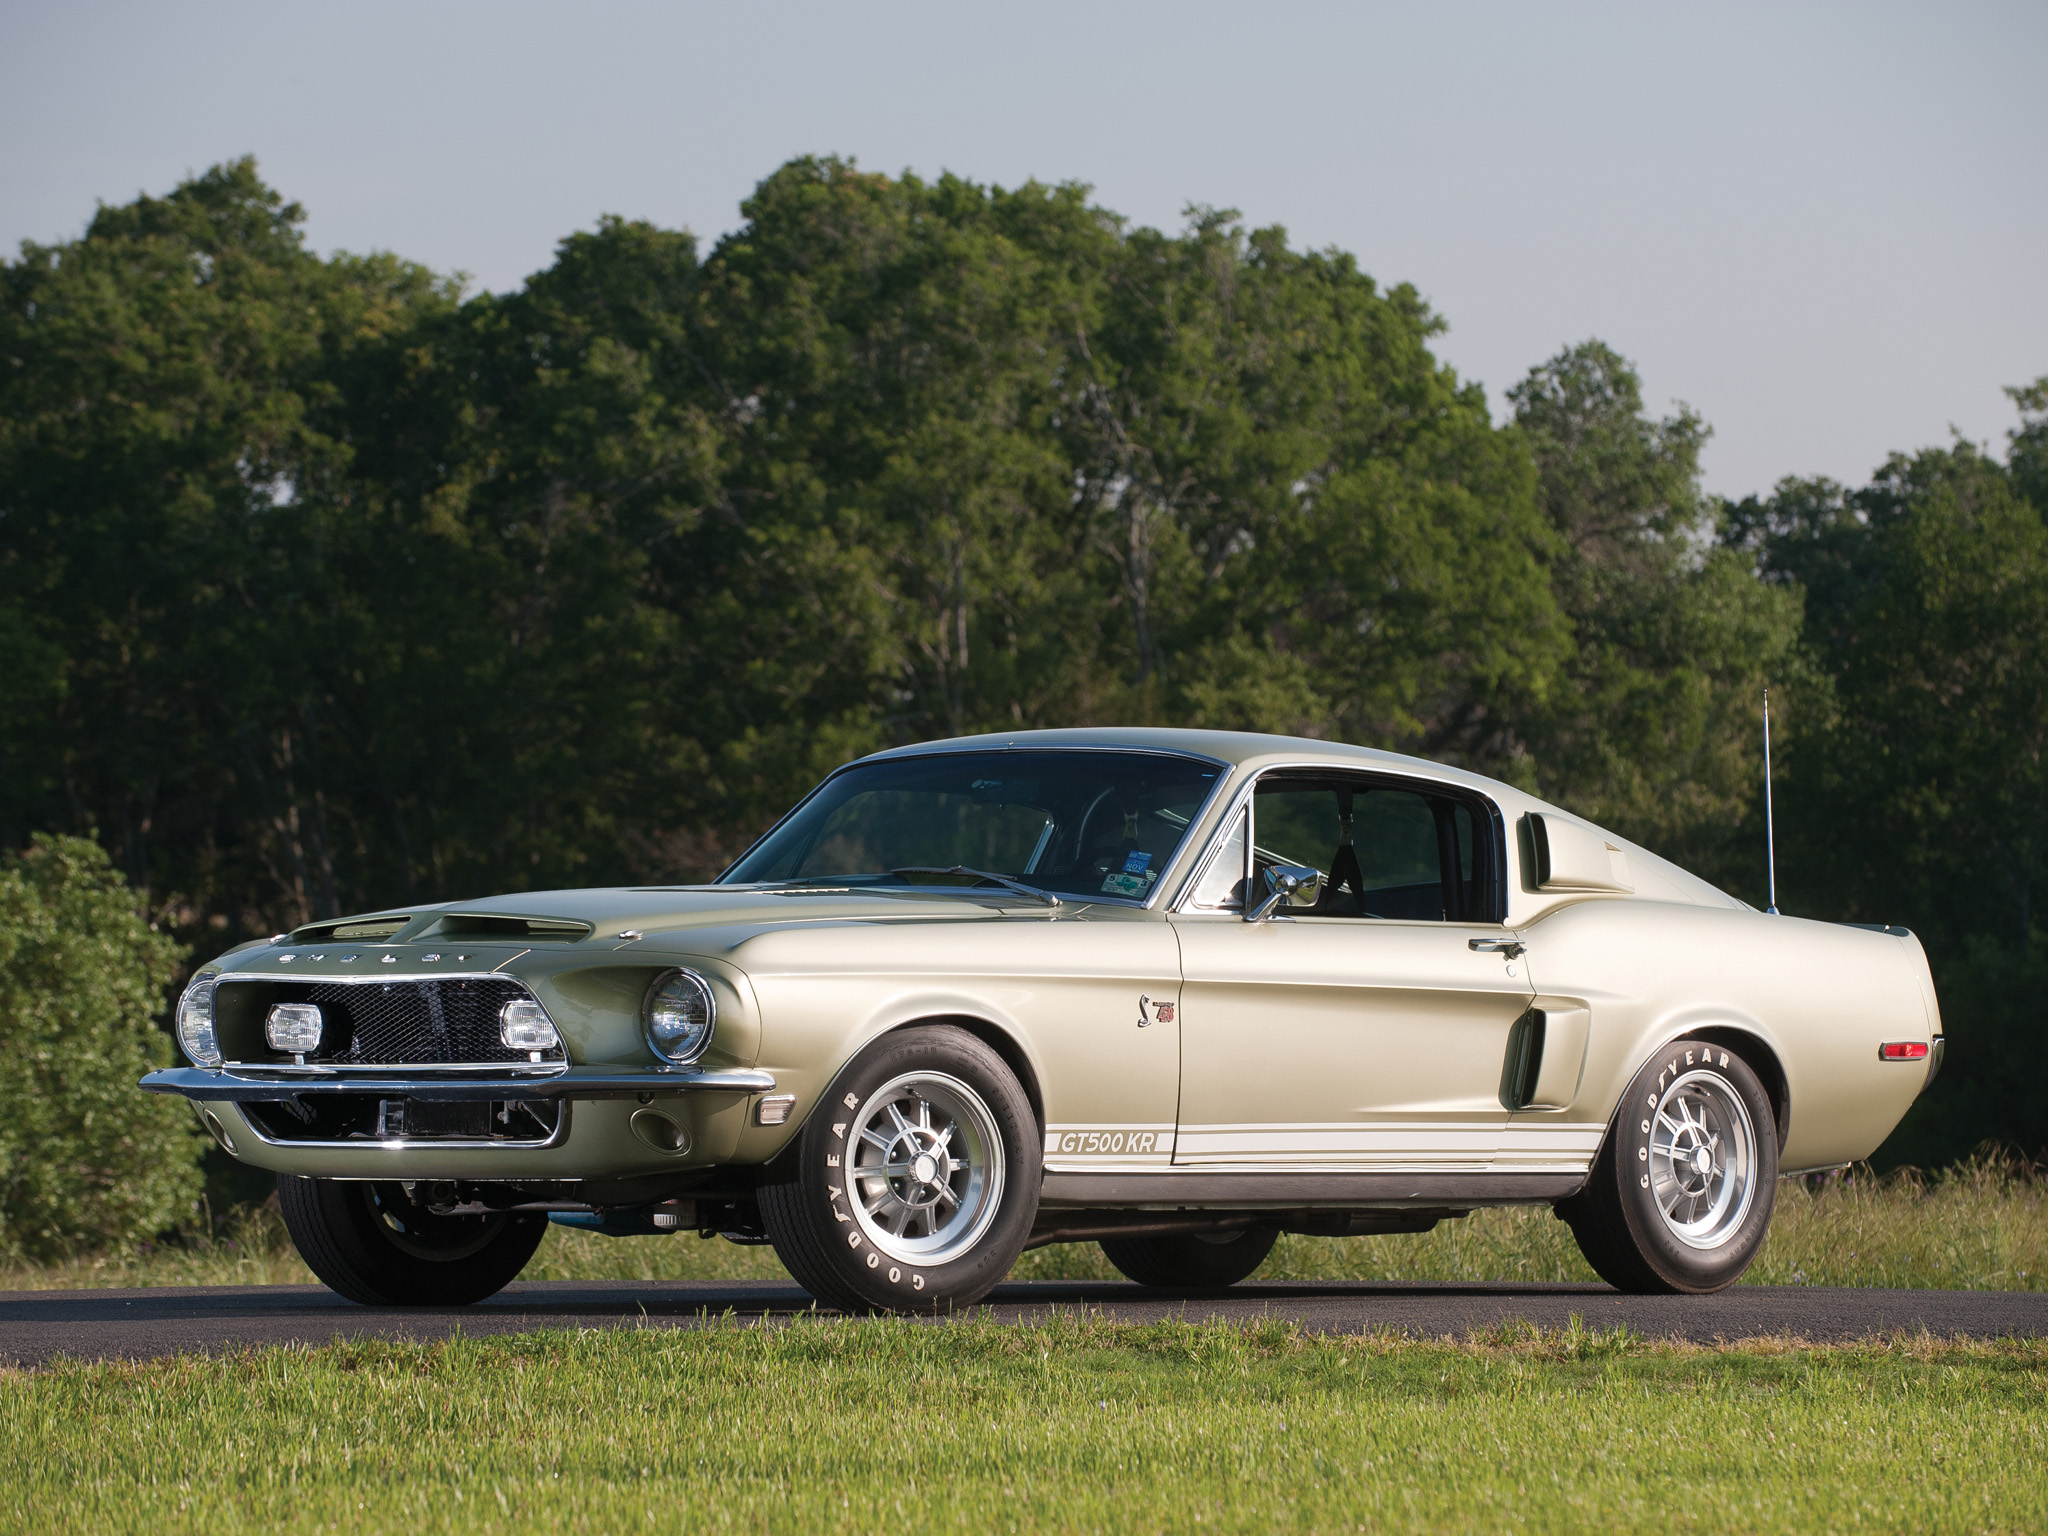 1968, Shelby, Gt500 kr, Gt500, Ford, Mustang, Muscle, Classic, Fw Wallpaper